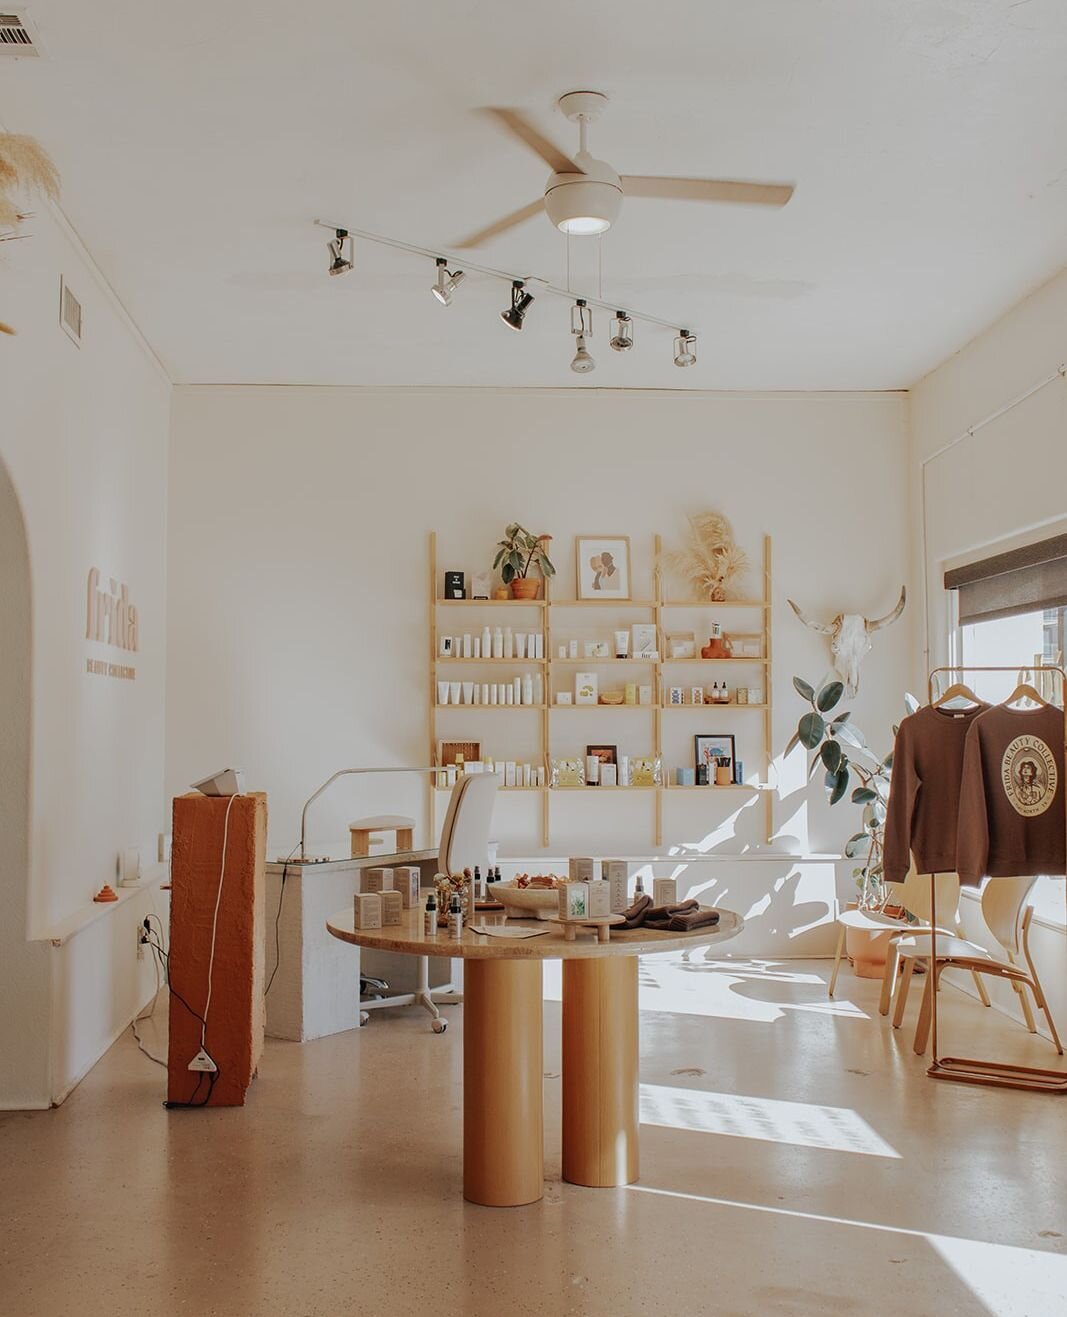 Frida Beauty Collective: A beauty and wellness studio for your self-care needs. Stop by our Race St location in Fort Worth and say hi! 💫 ✨ ⁠
⁠
#fortworthsalon #fortworthbeauty #beautysalon  #fridabeautycollective #fortworthlocal #trendylook #holisti